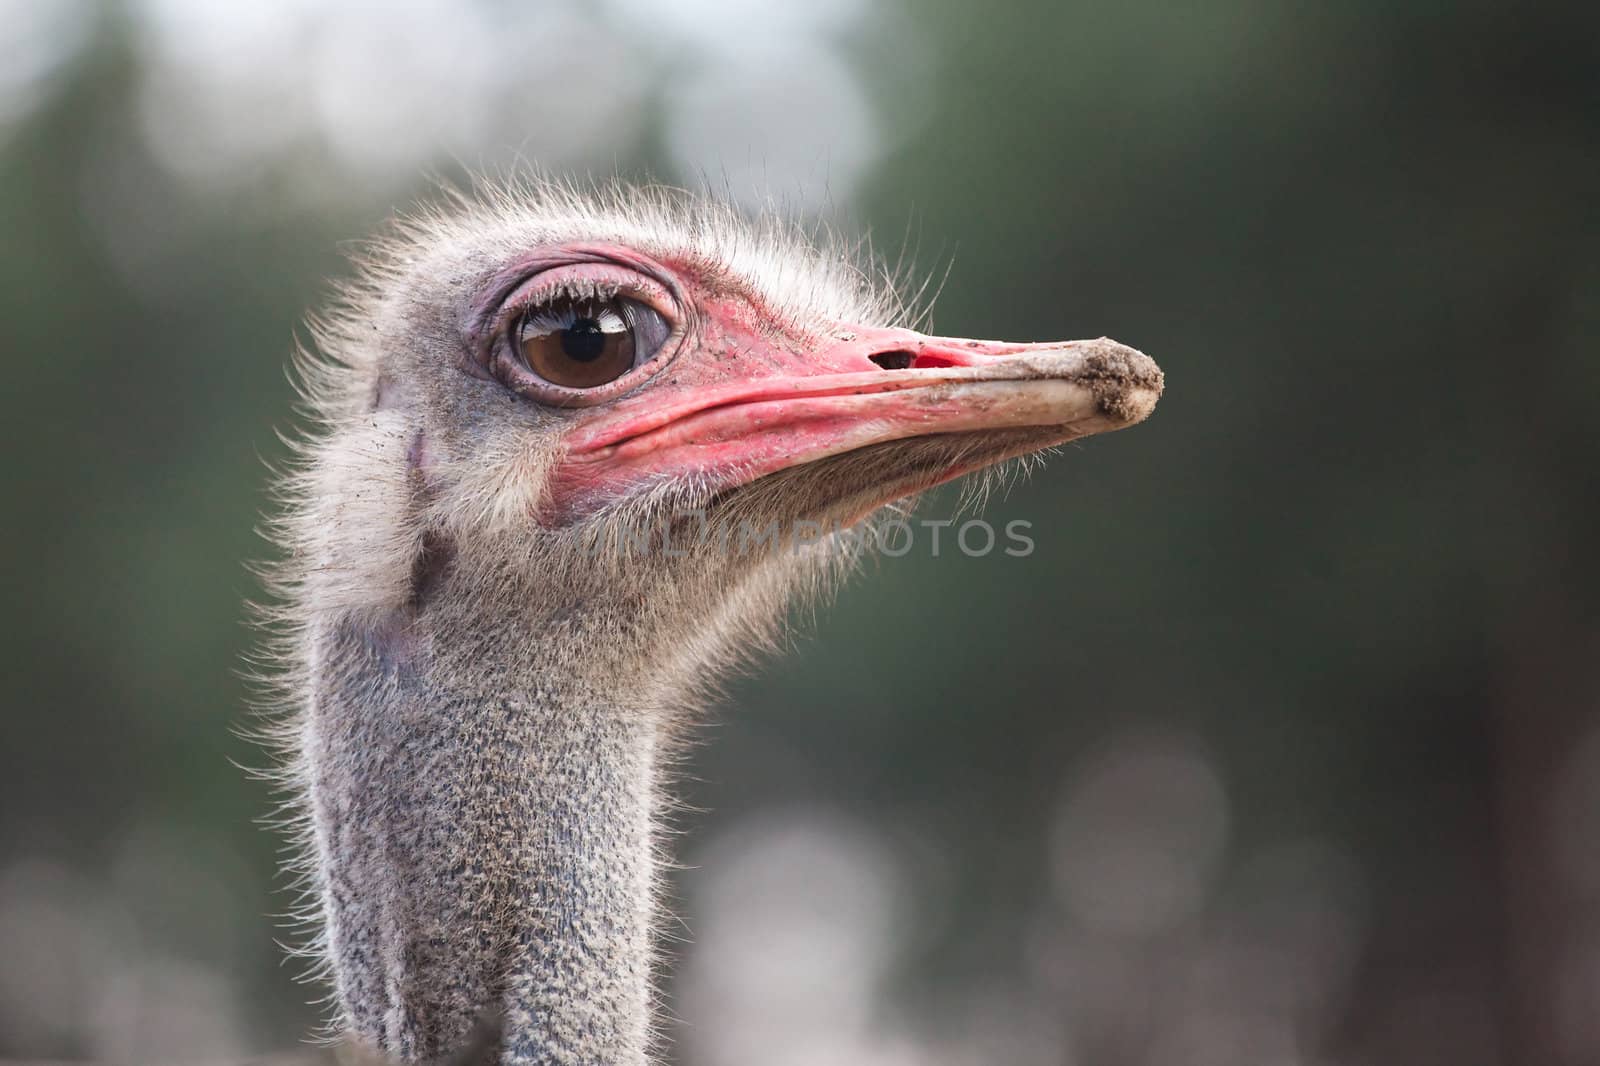 ostrich watching for something by furzyk73